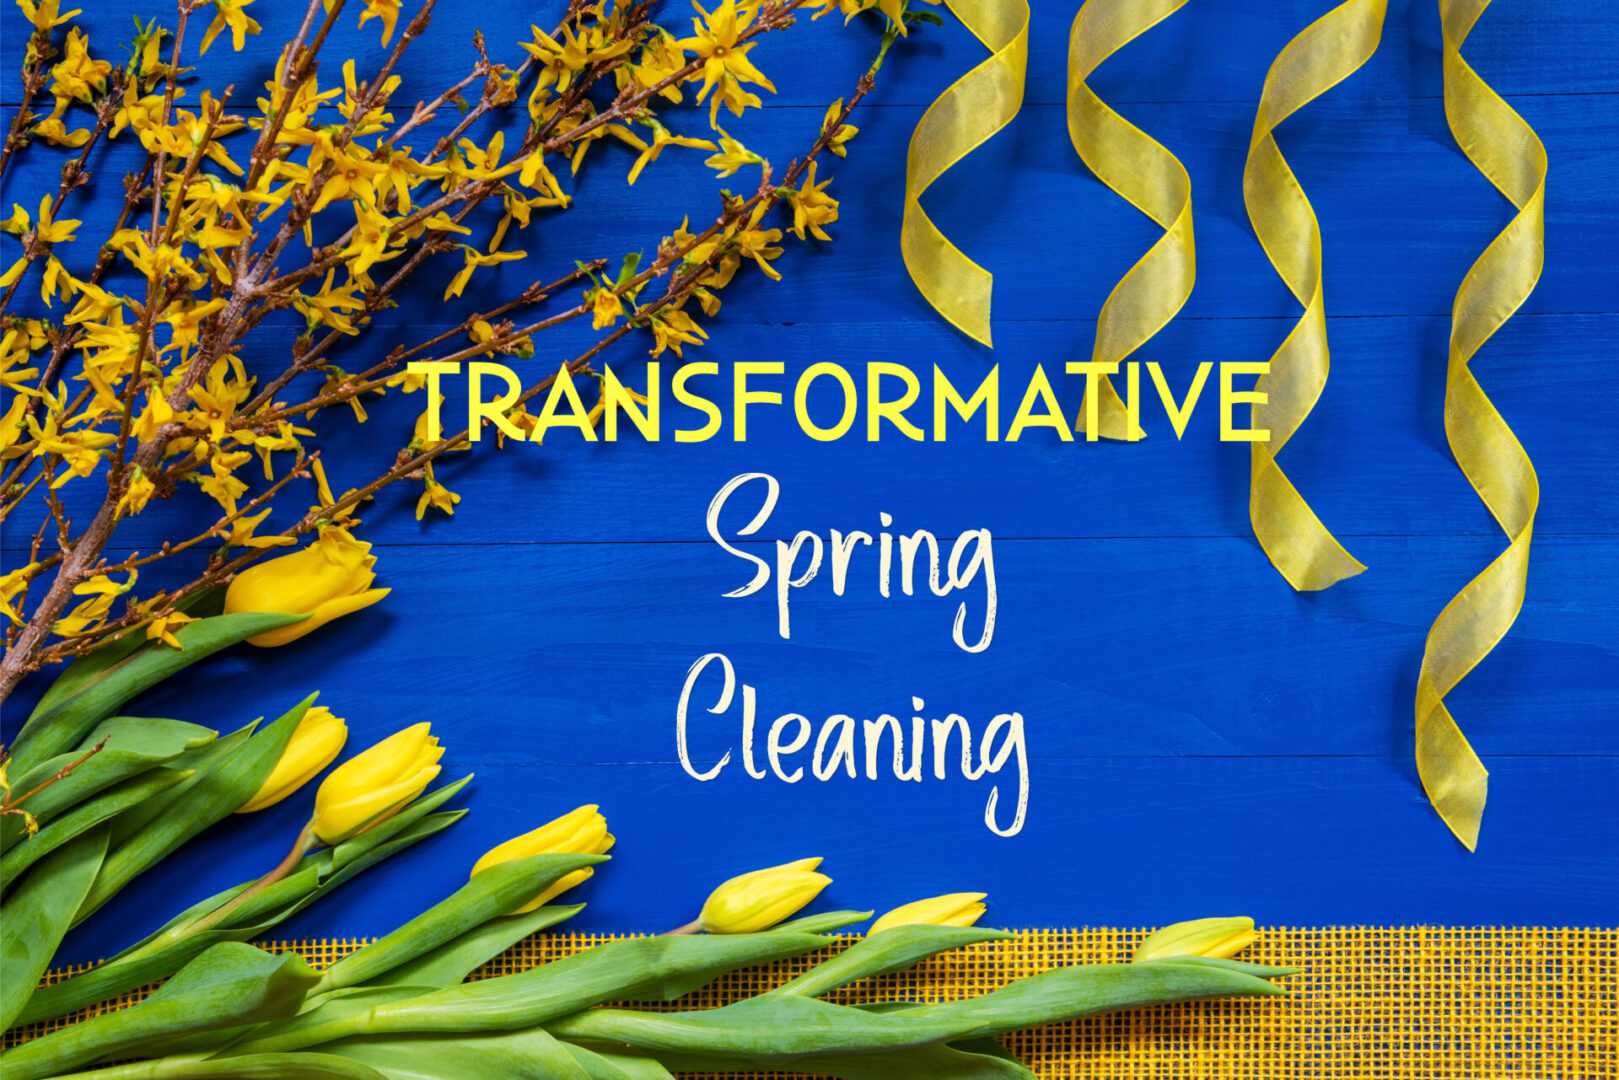 "Transformative Spring Cleaning" in white and yellow letters on a blue background with yellow  tulips and ribbons